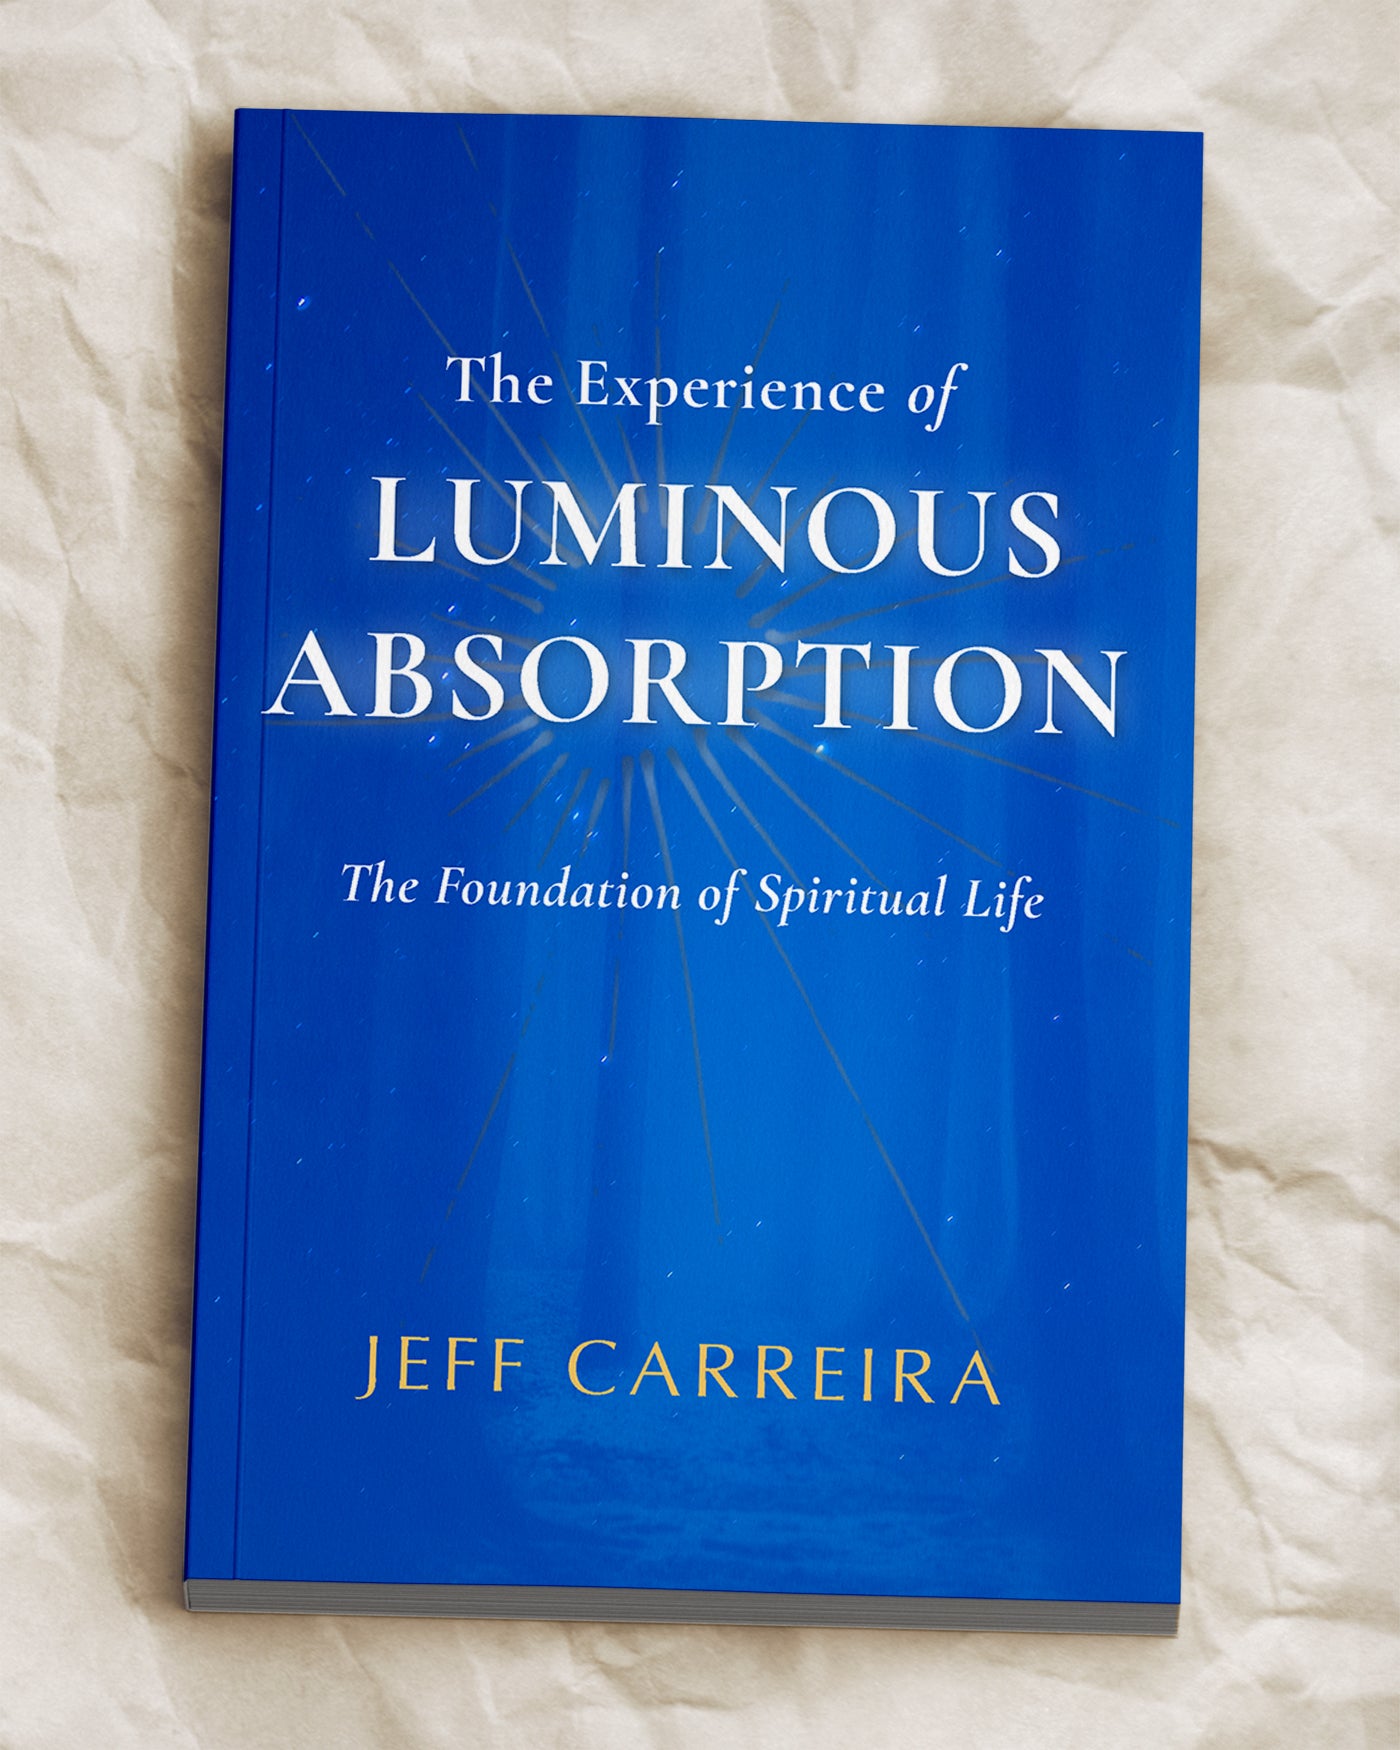 The Experience of Luminous Absorption: The Foundation of Spiritual Life